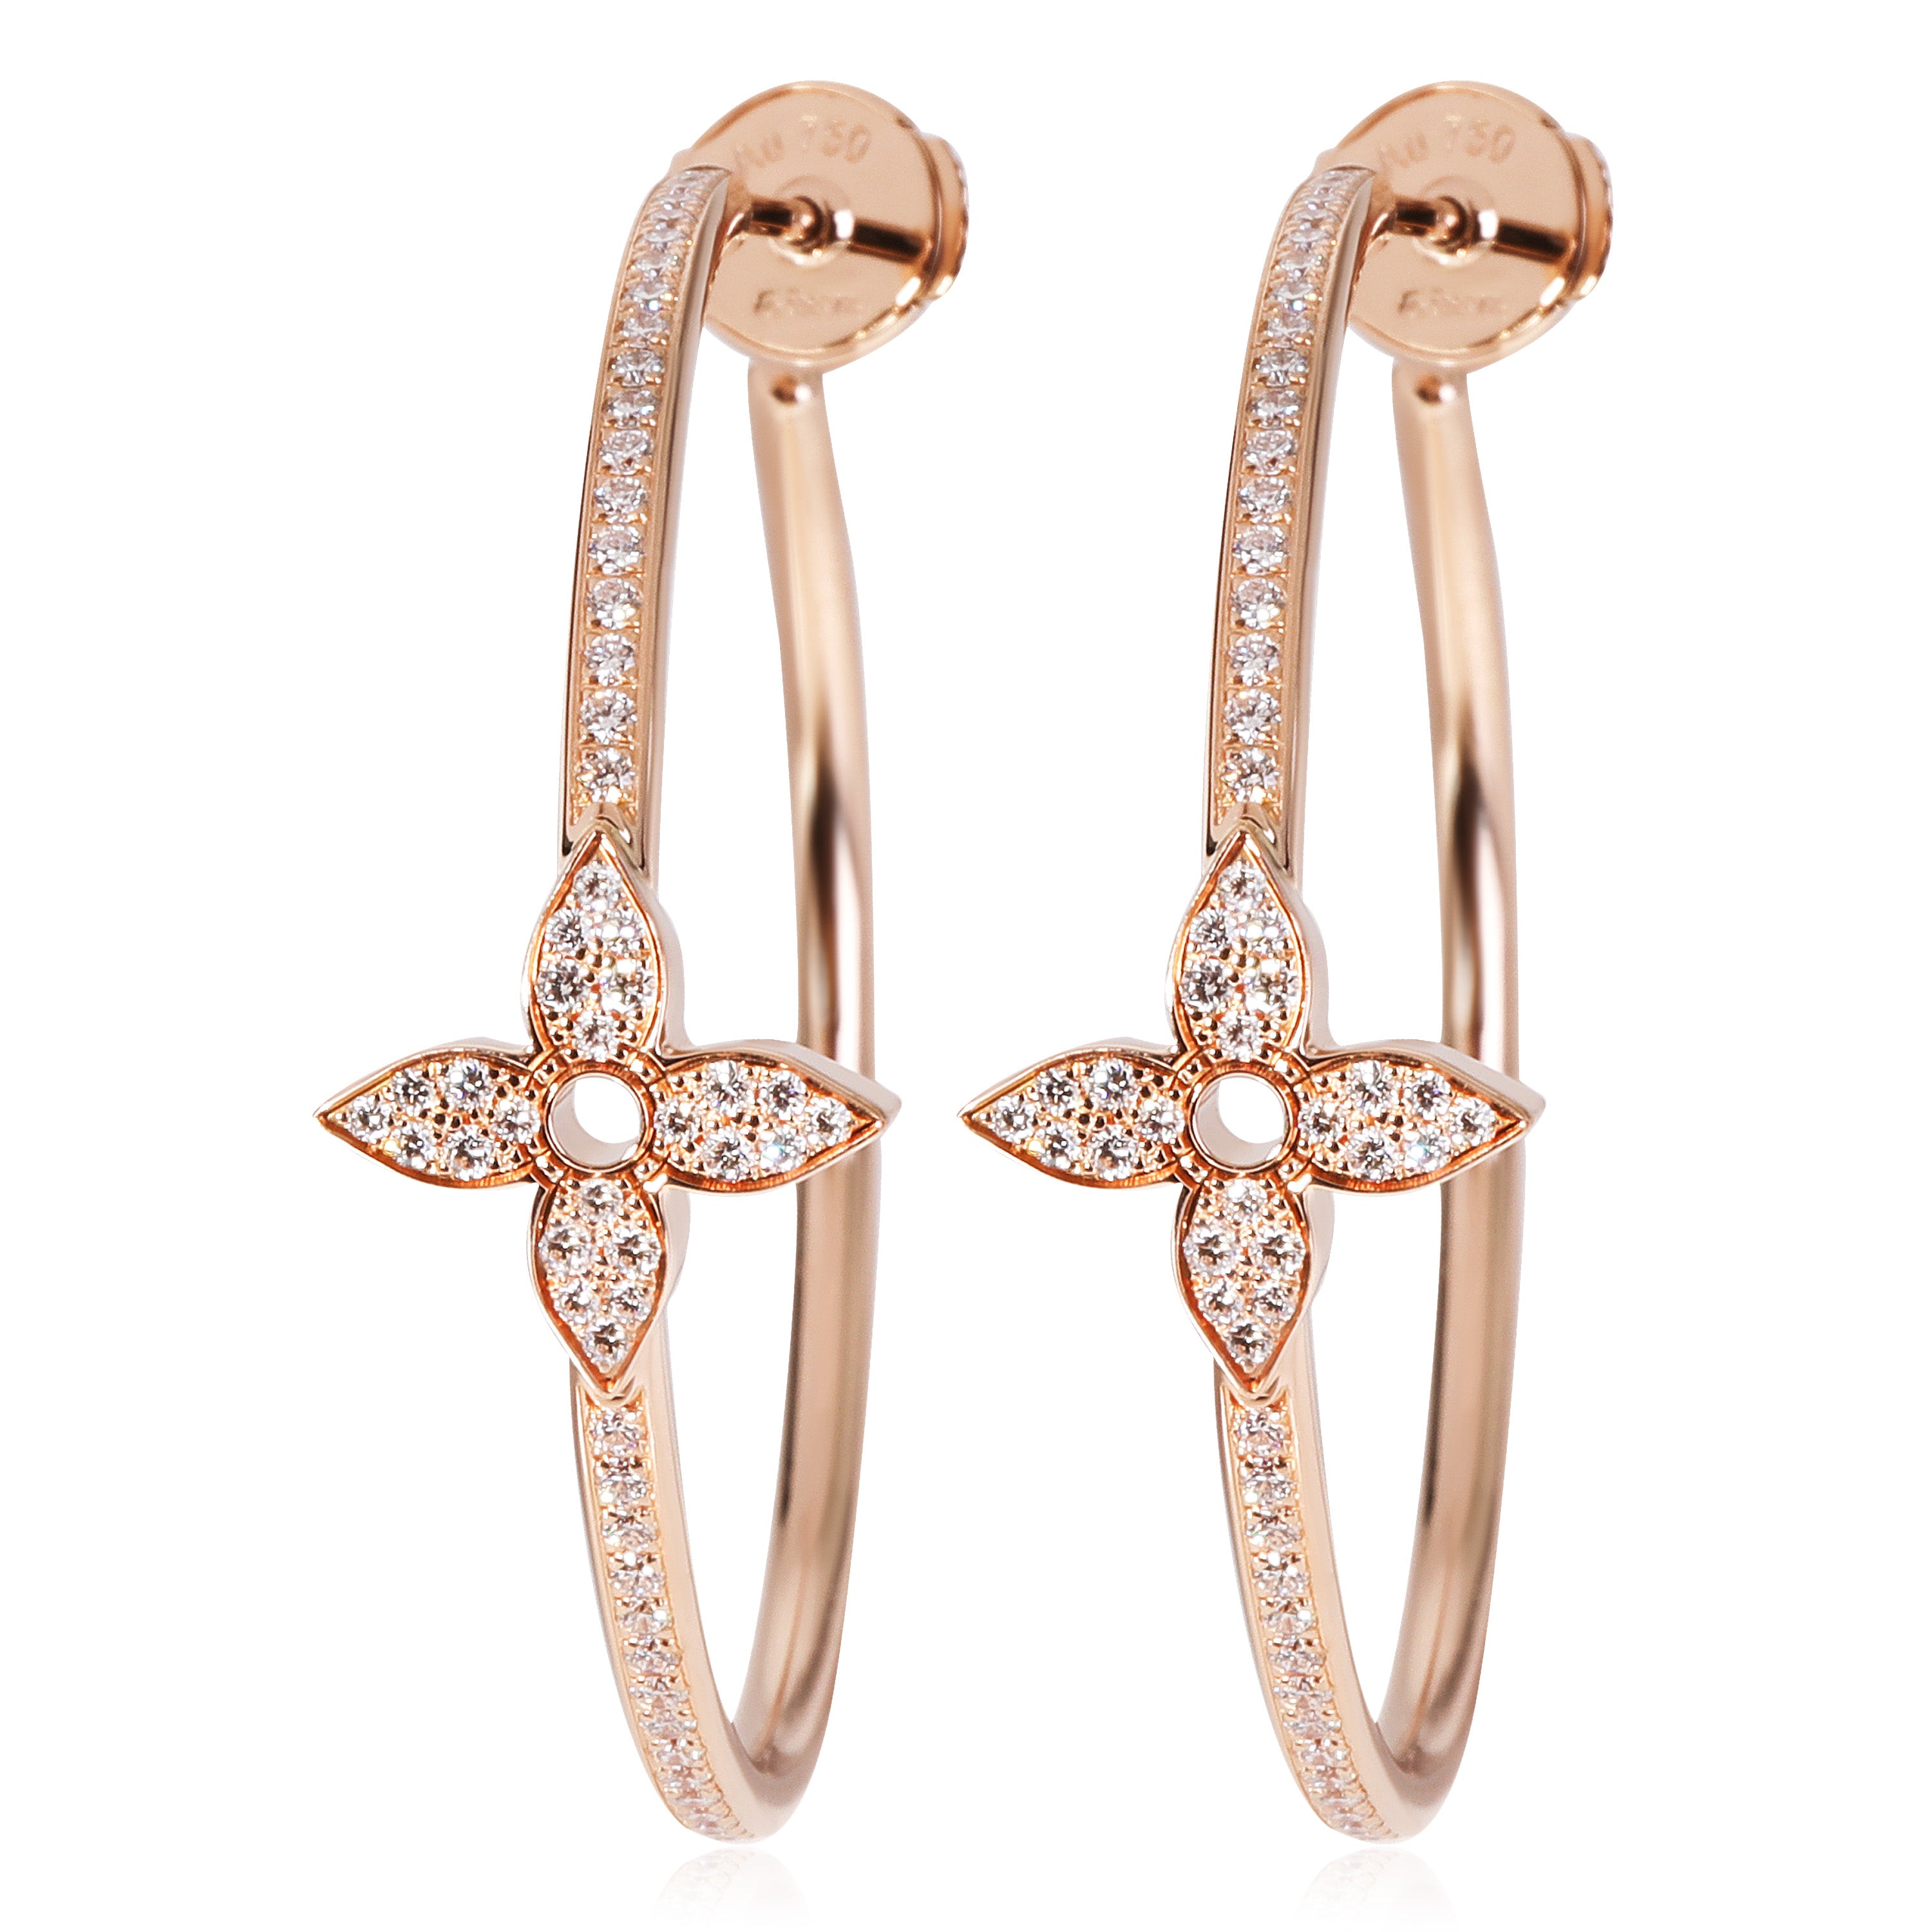 Idylle Blossom Right Earring, Pink Gold And Diamonds - Per Unit - Jewelry -  Categories